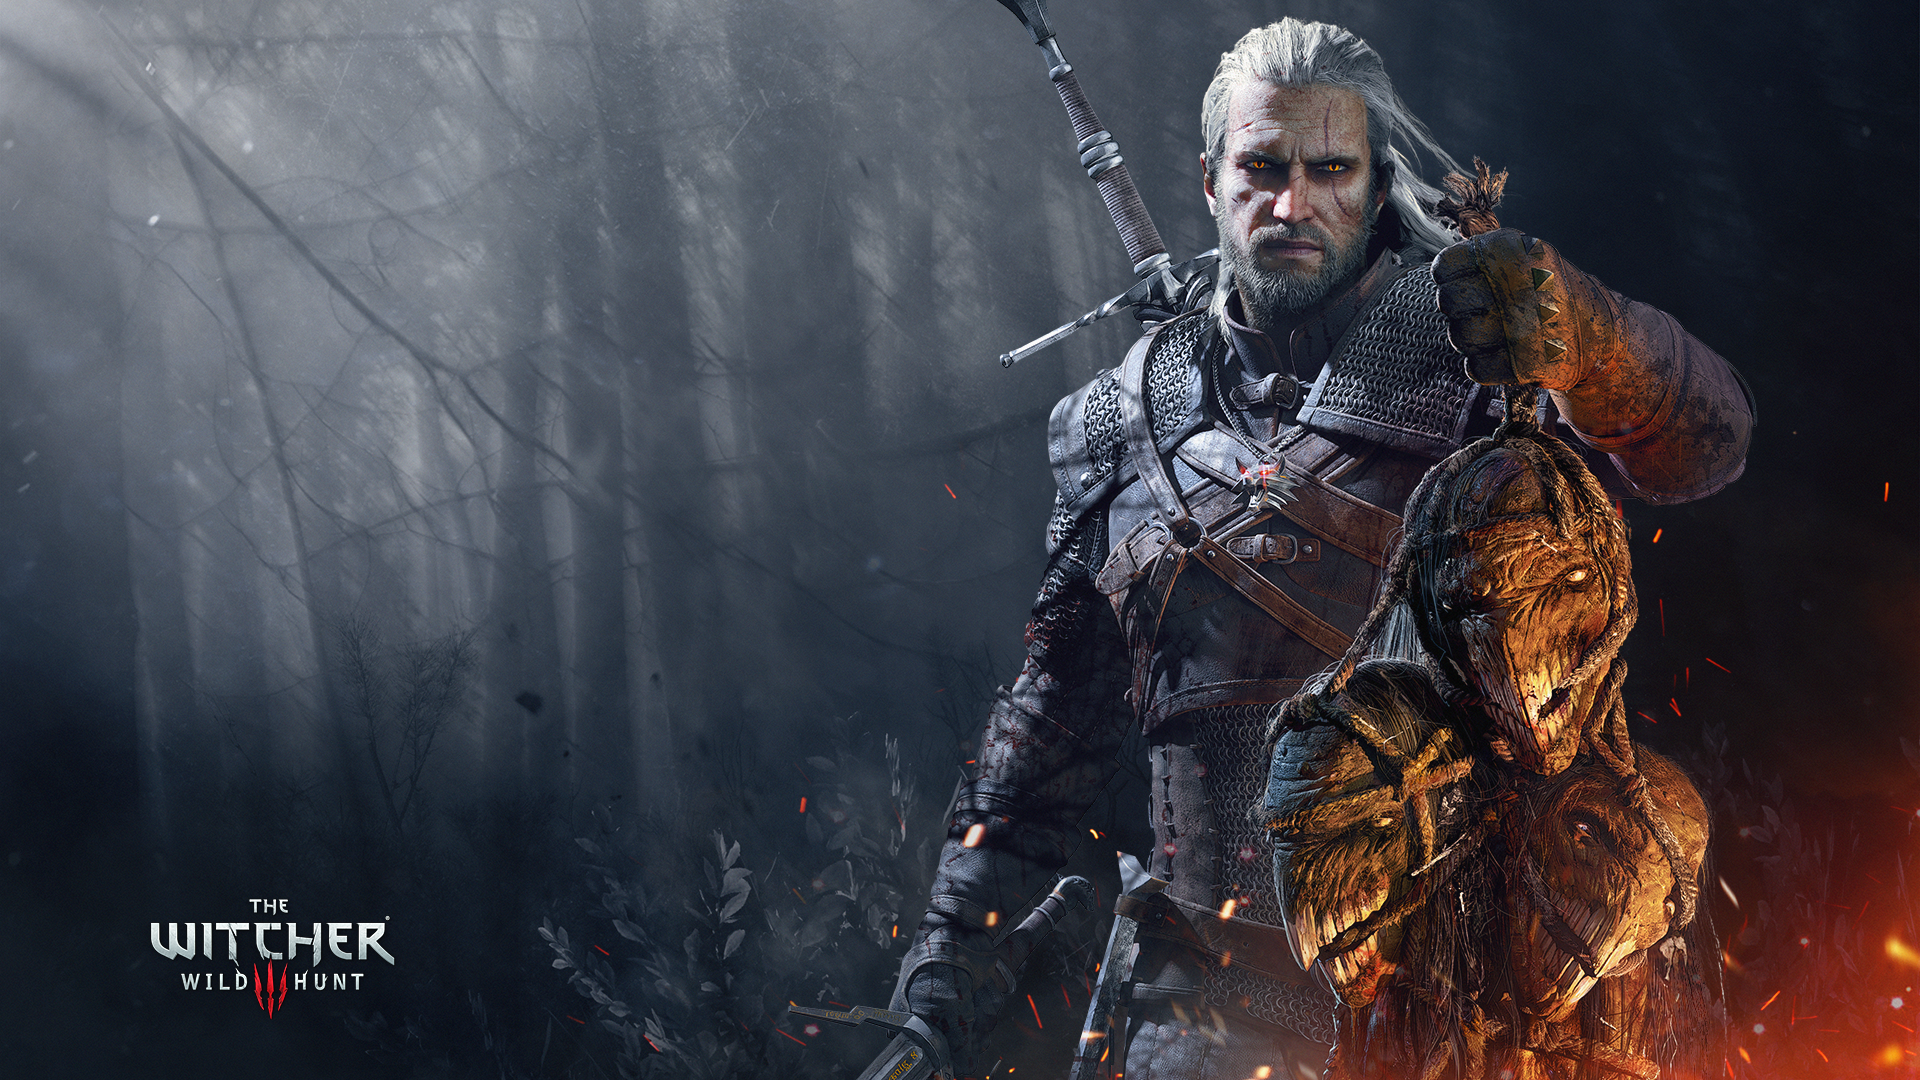 The Witcher - Witcher 3 Wild Hunt Hd , HD Wallpaper & Backgrounds